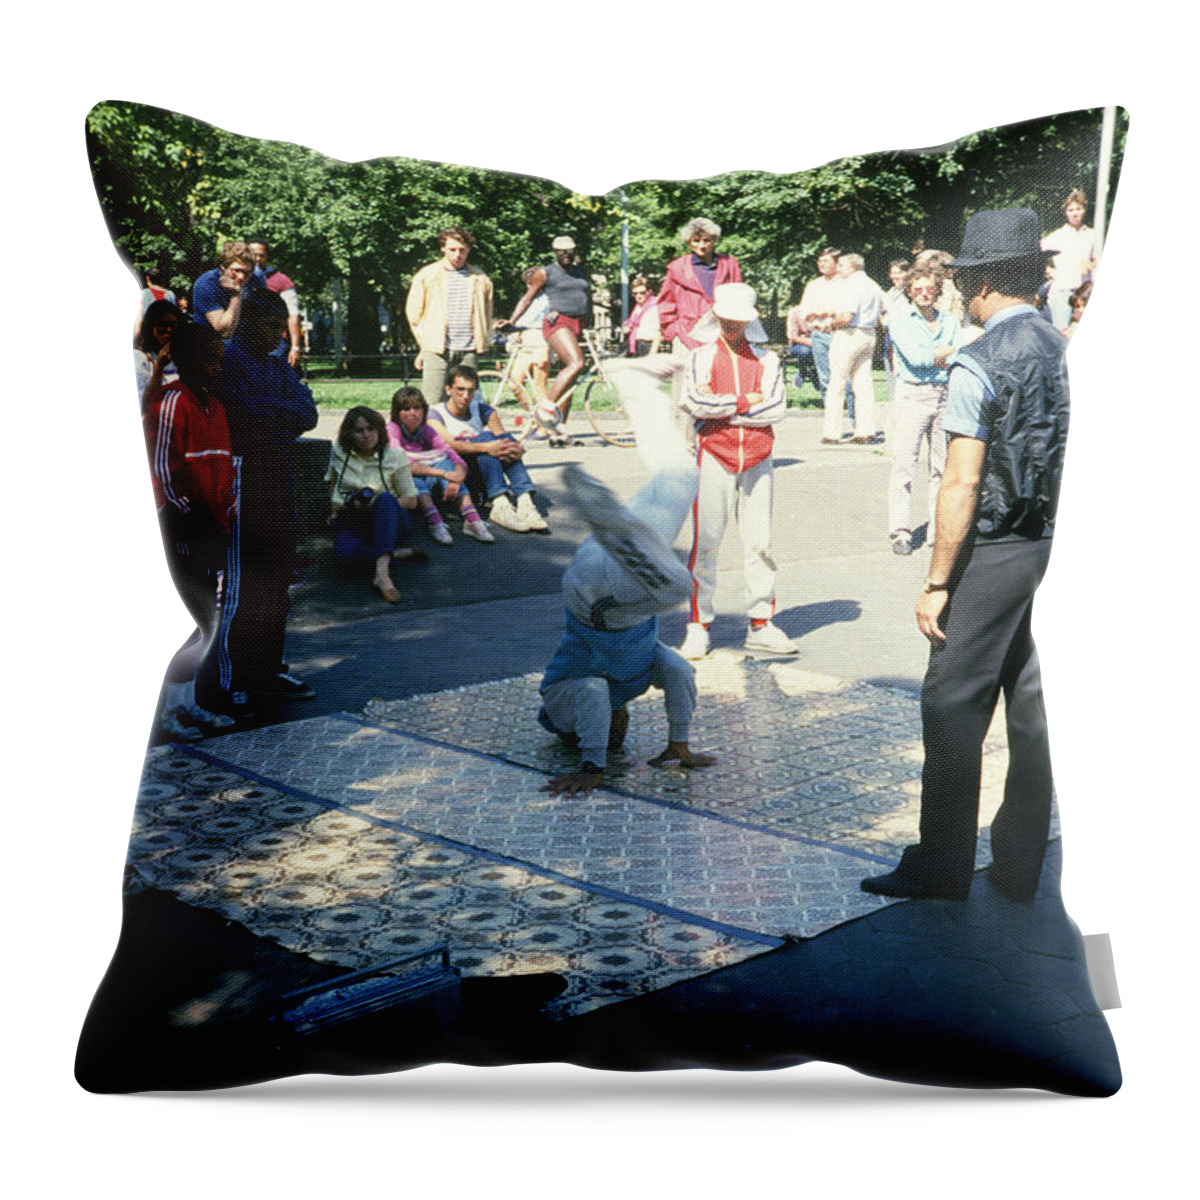 Break Dancing Throw Pillow featuring the photograph Break Dancing in Washington Square Park in 1984 by Gordon James